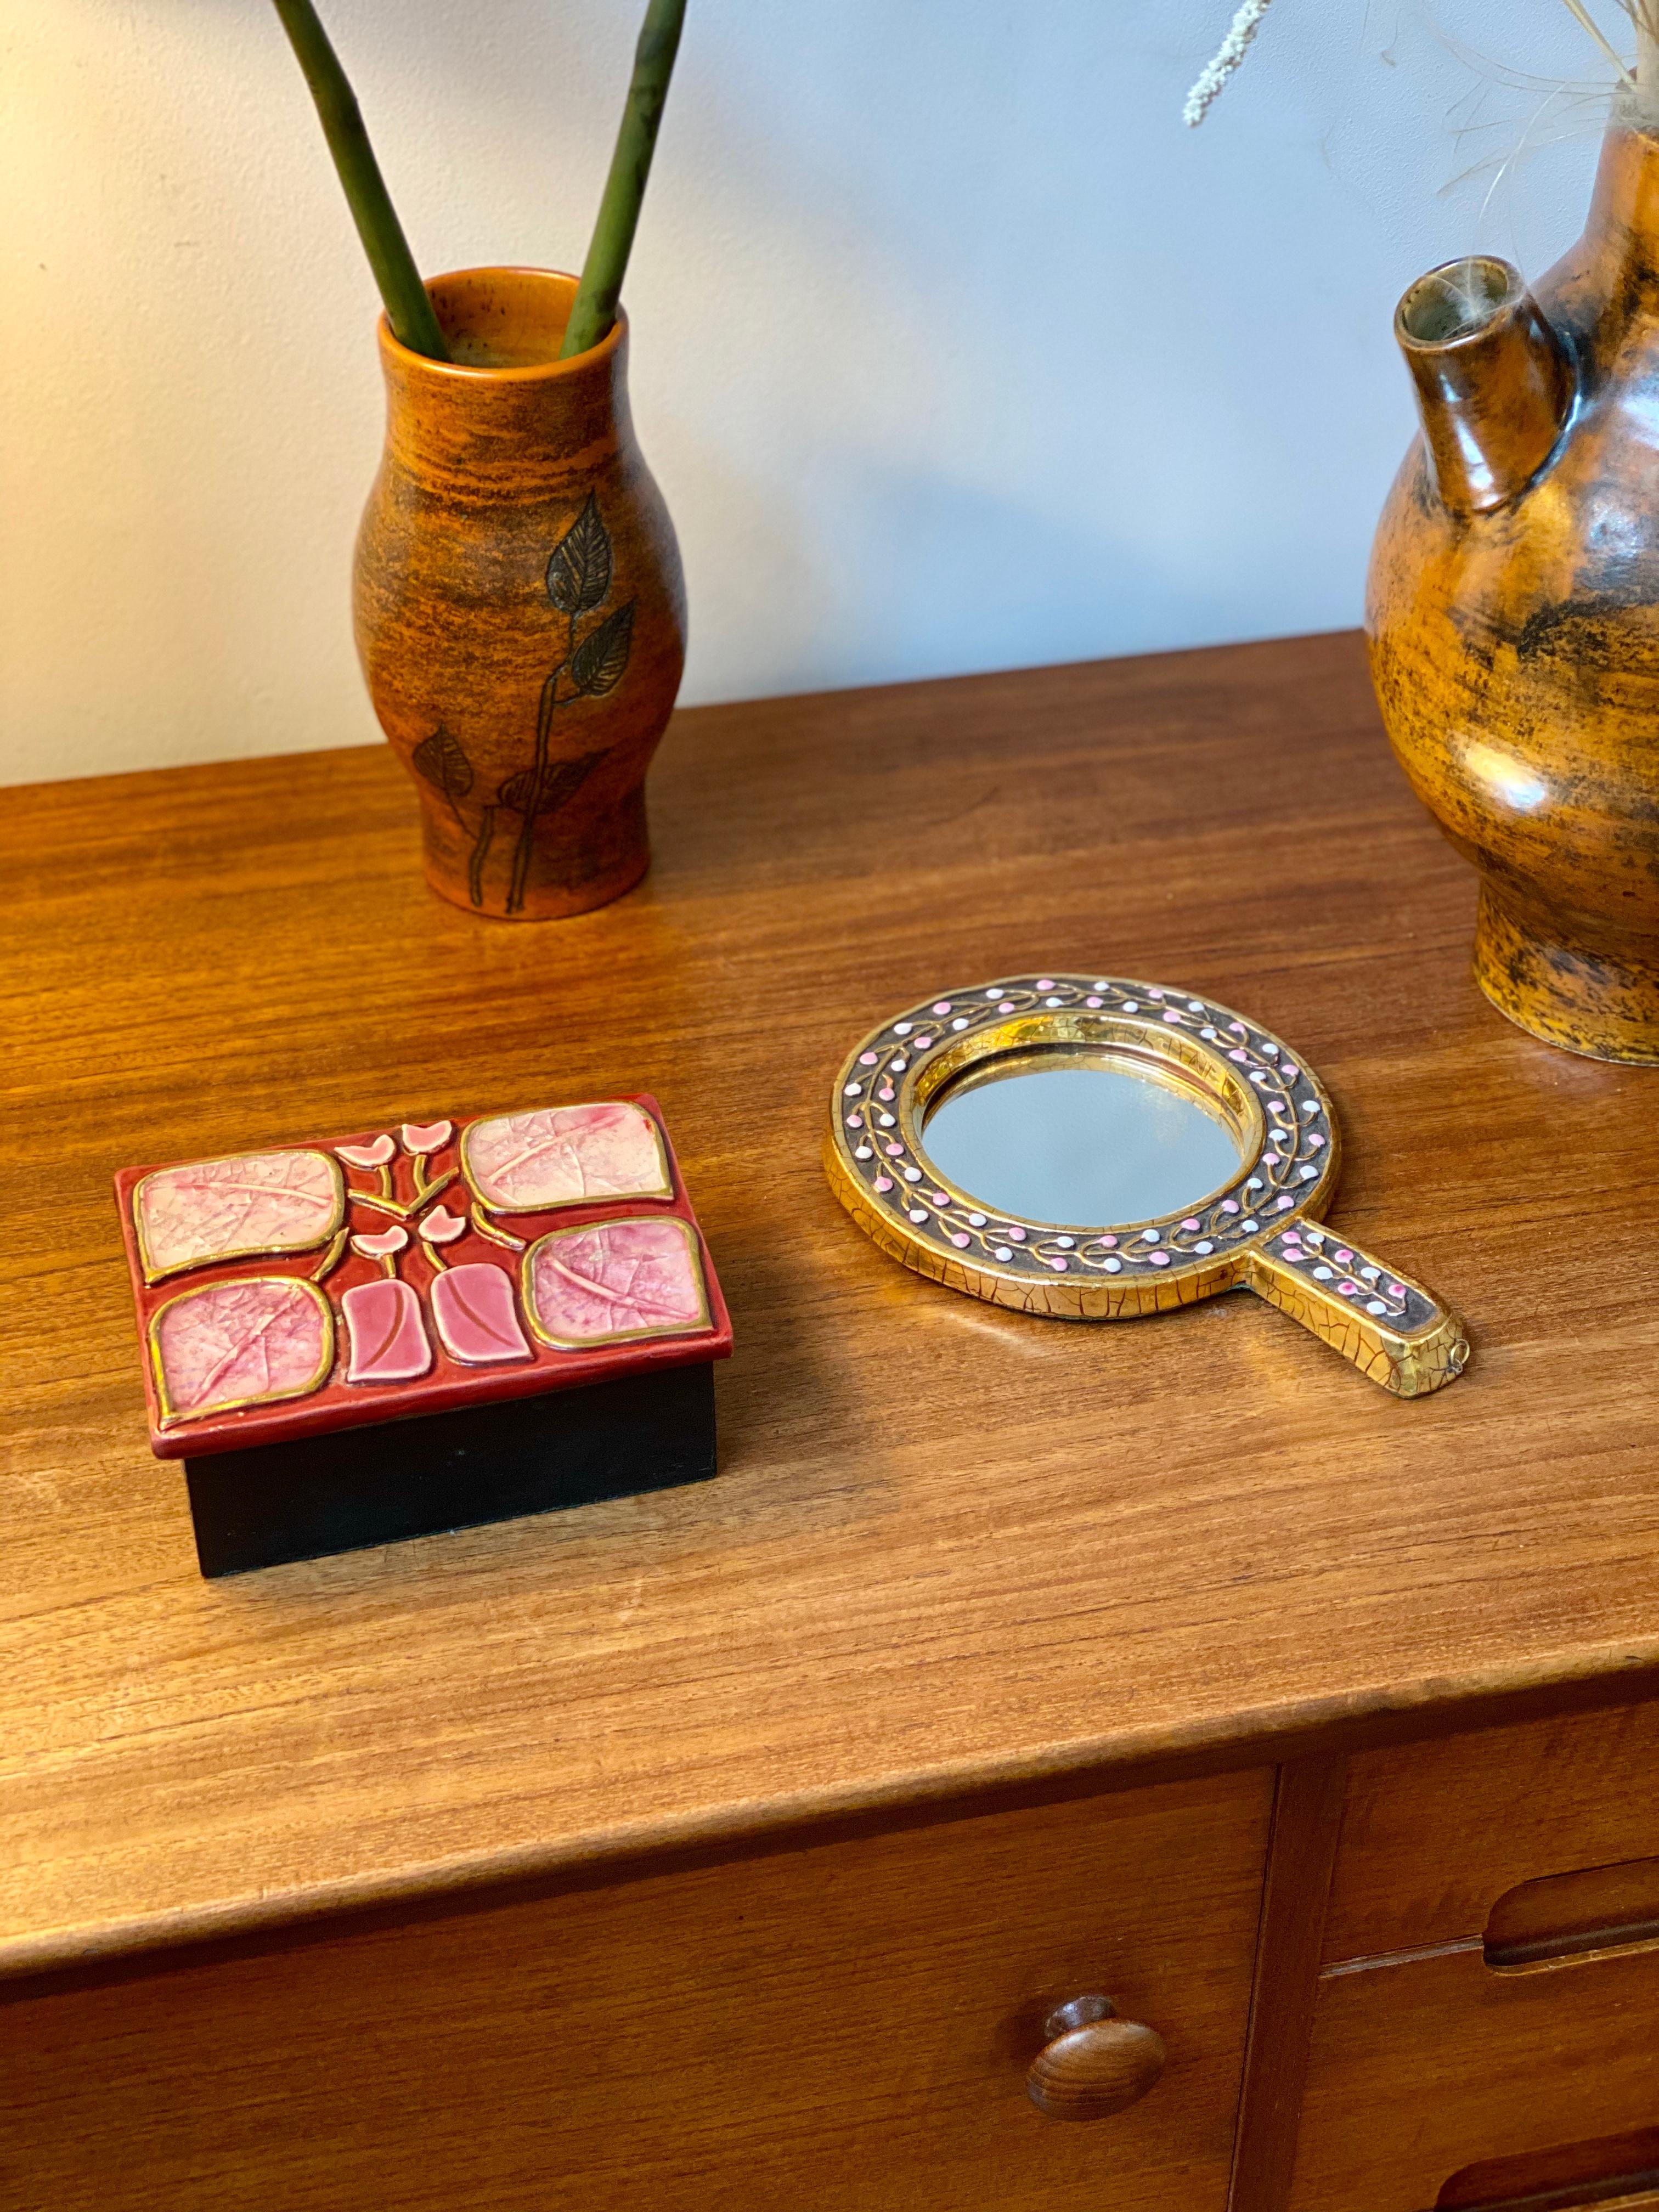 Decorative jewelry box with enamel lid and flower motif by François Lembo (circa 1960s). Stylised pink and white highlighted leaves outlined in gold-coloured craquelure cover the rectangular-shaped decorative box. It is at once a visually stunning